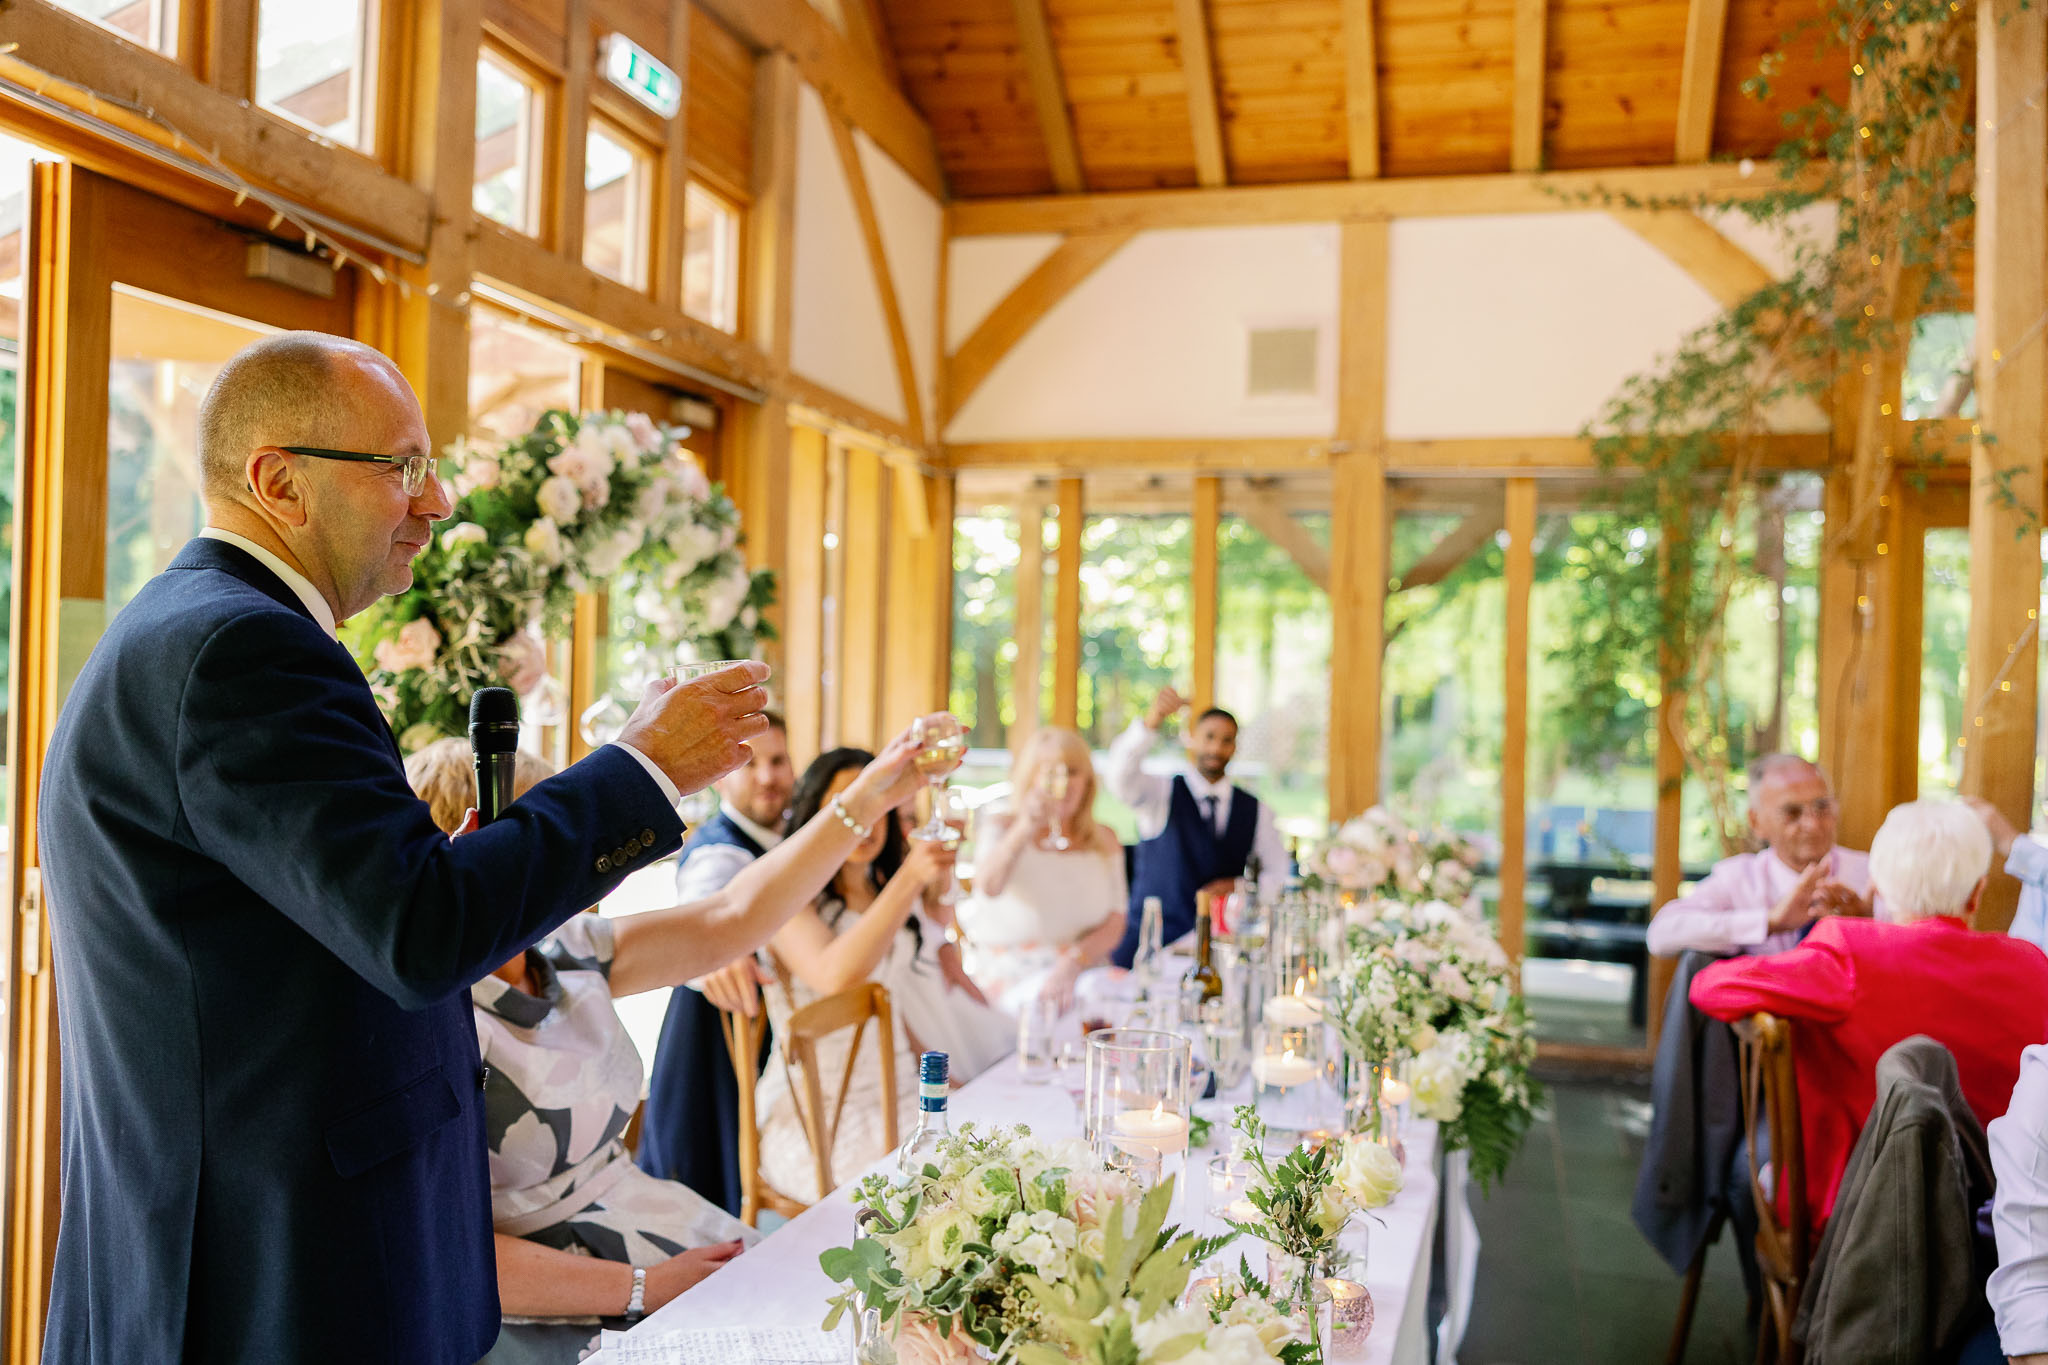 Wedding Speeches at an exclusive wedding venue in Cheshire